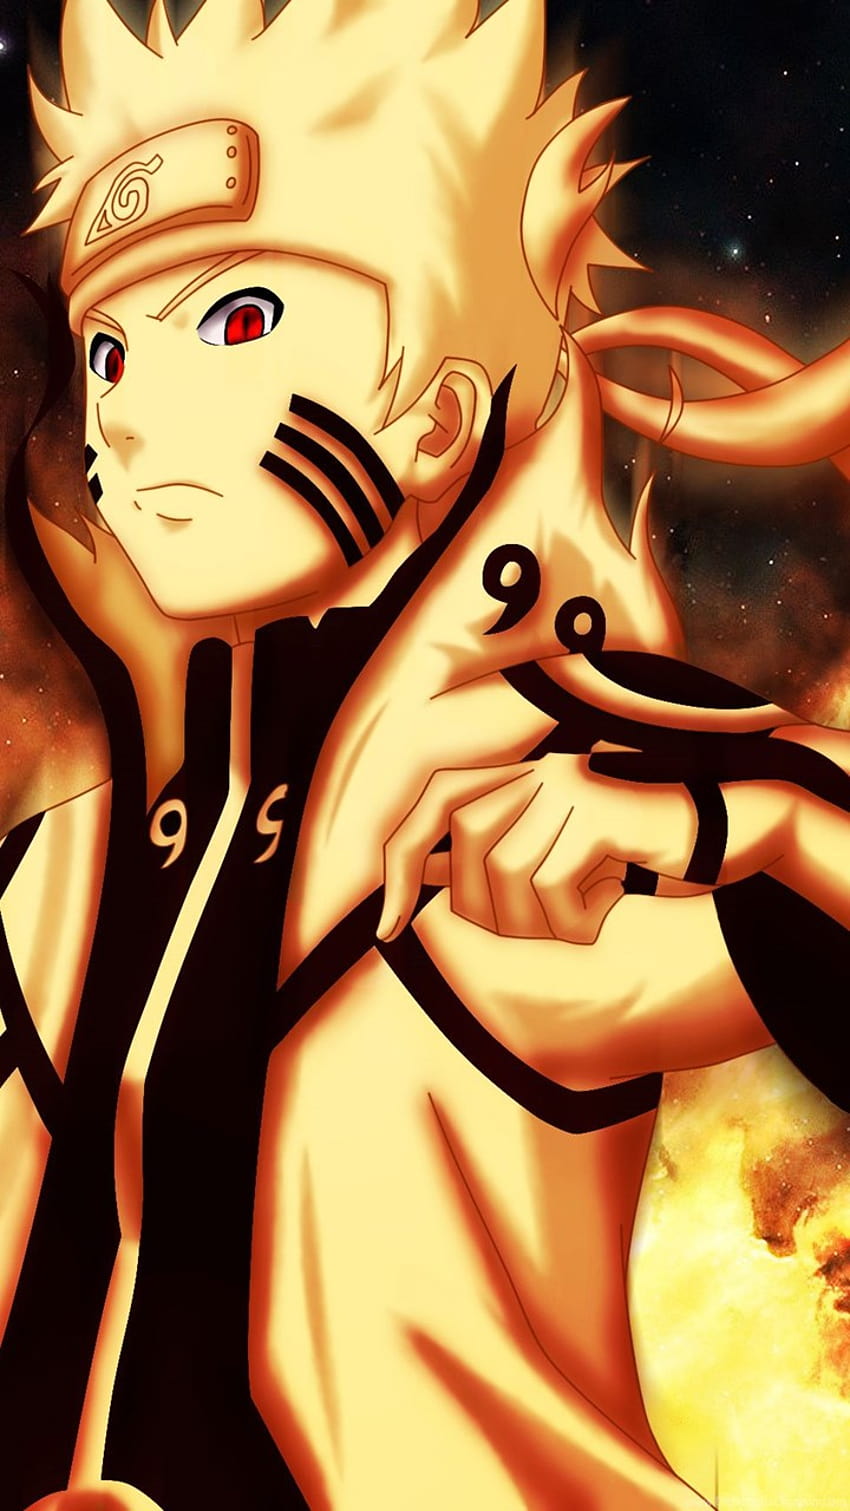 Naruto For Android posted by Ryan Peltier, naruto full body HD phone wallpaper